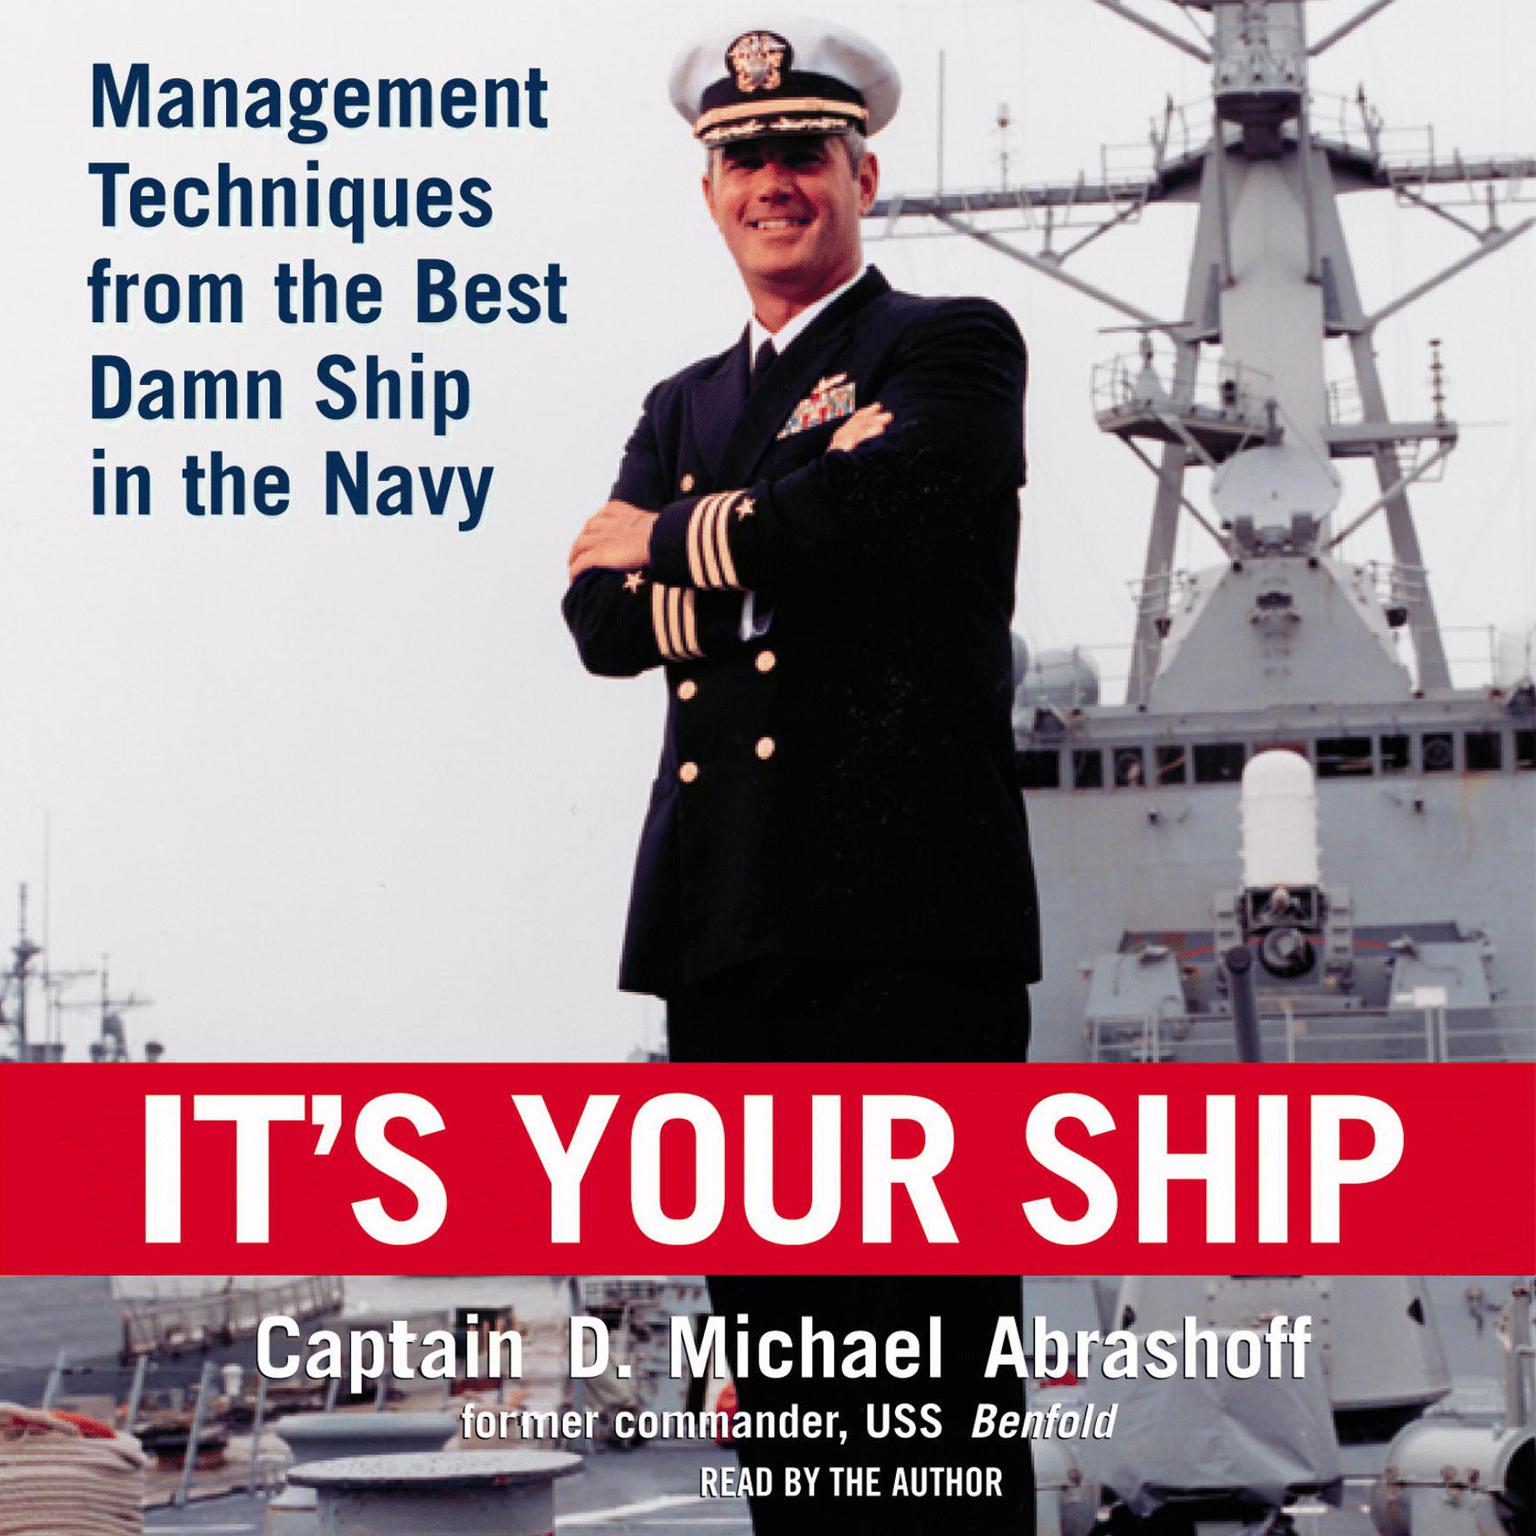 Its Your Ship (Abridged): Management Techniques from the Best Damn Ship in the Navy Audiobook, by D. Michael Abrashoff